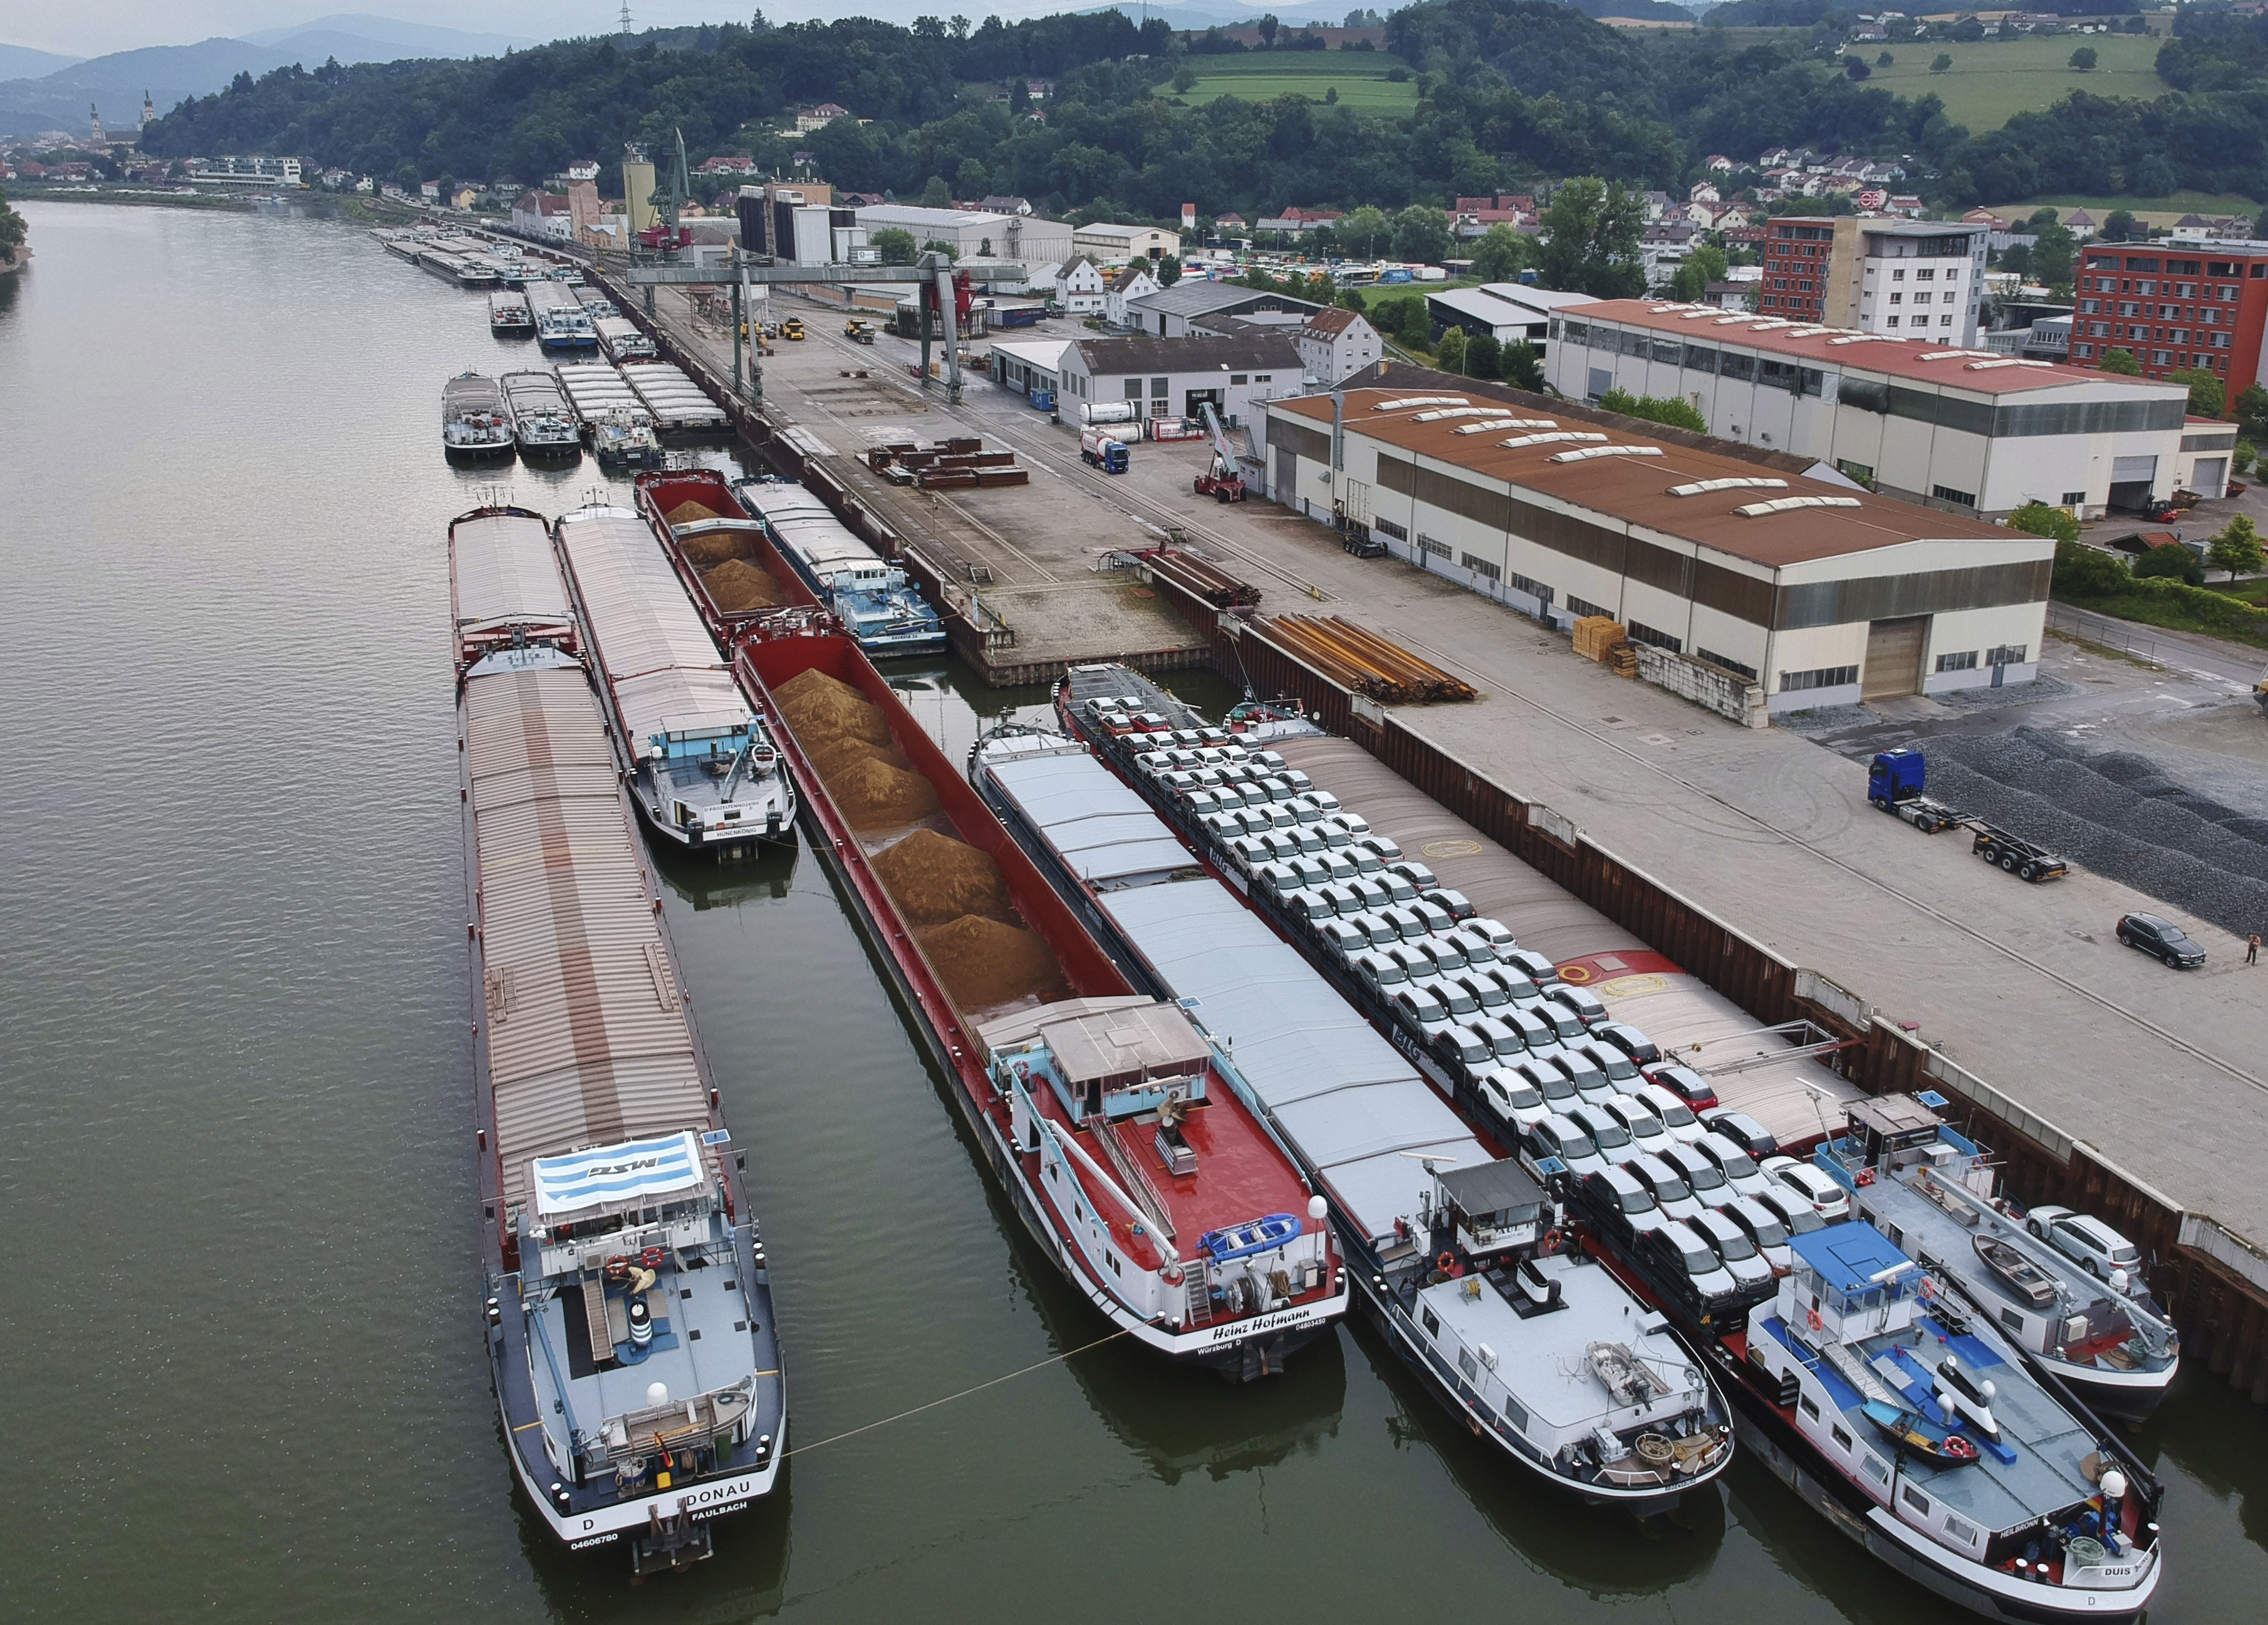 Danube ports of Regensburg and Passau are fully operational again